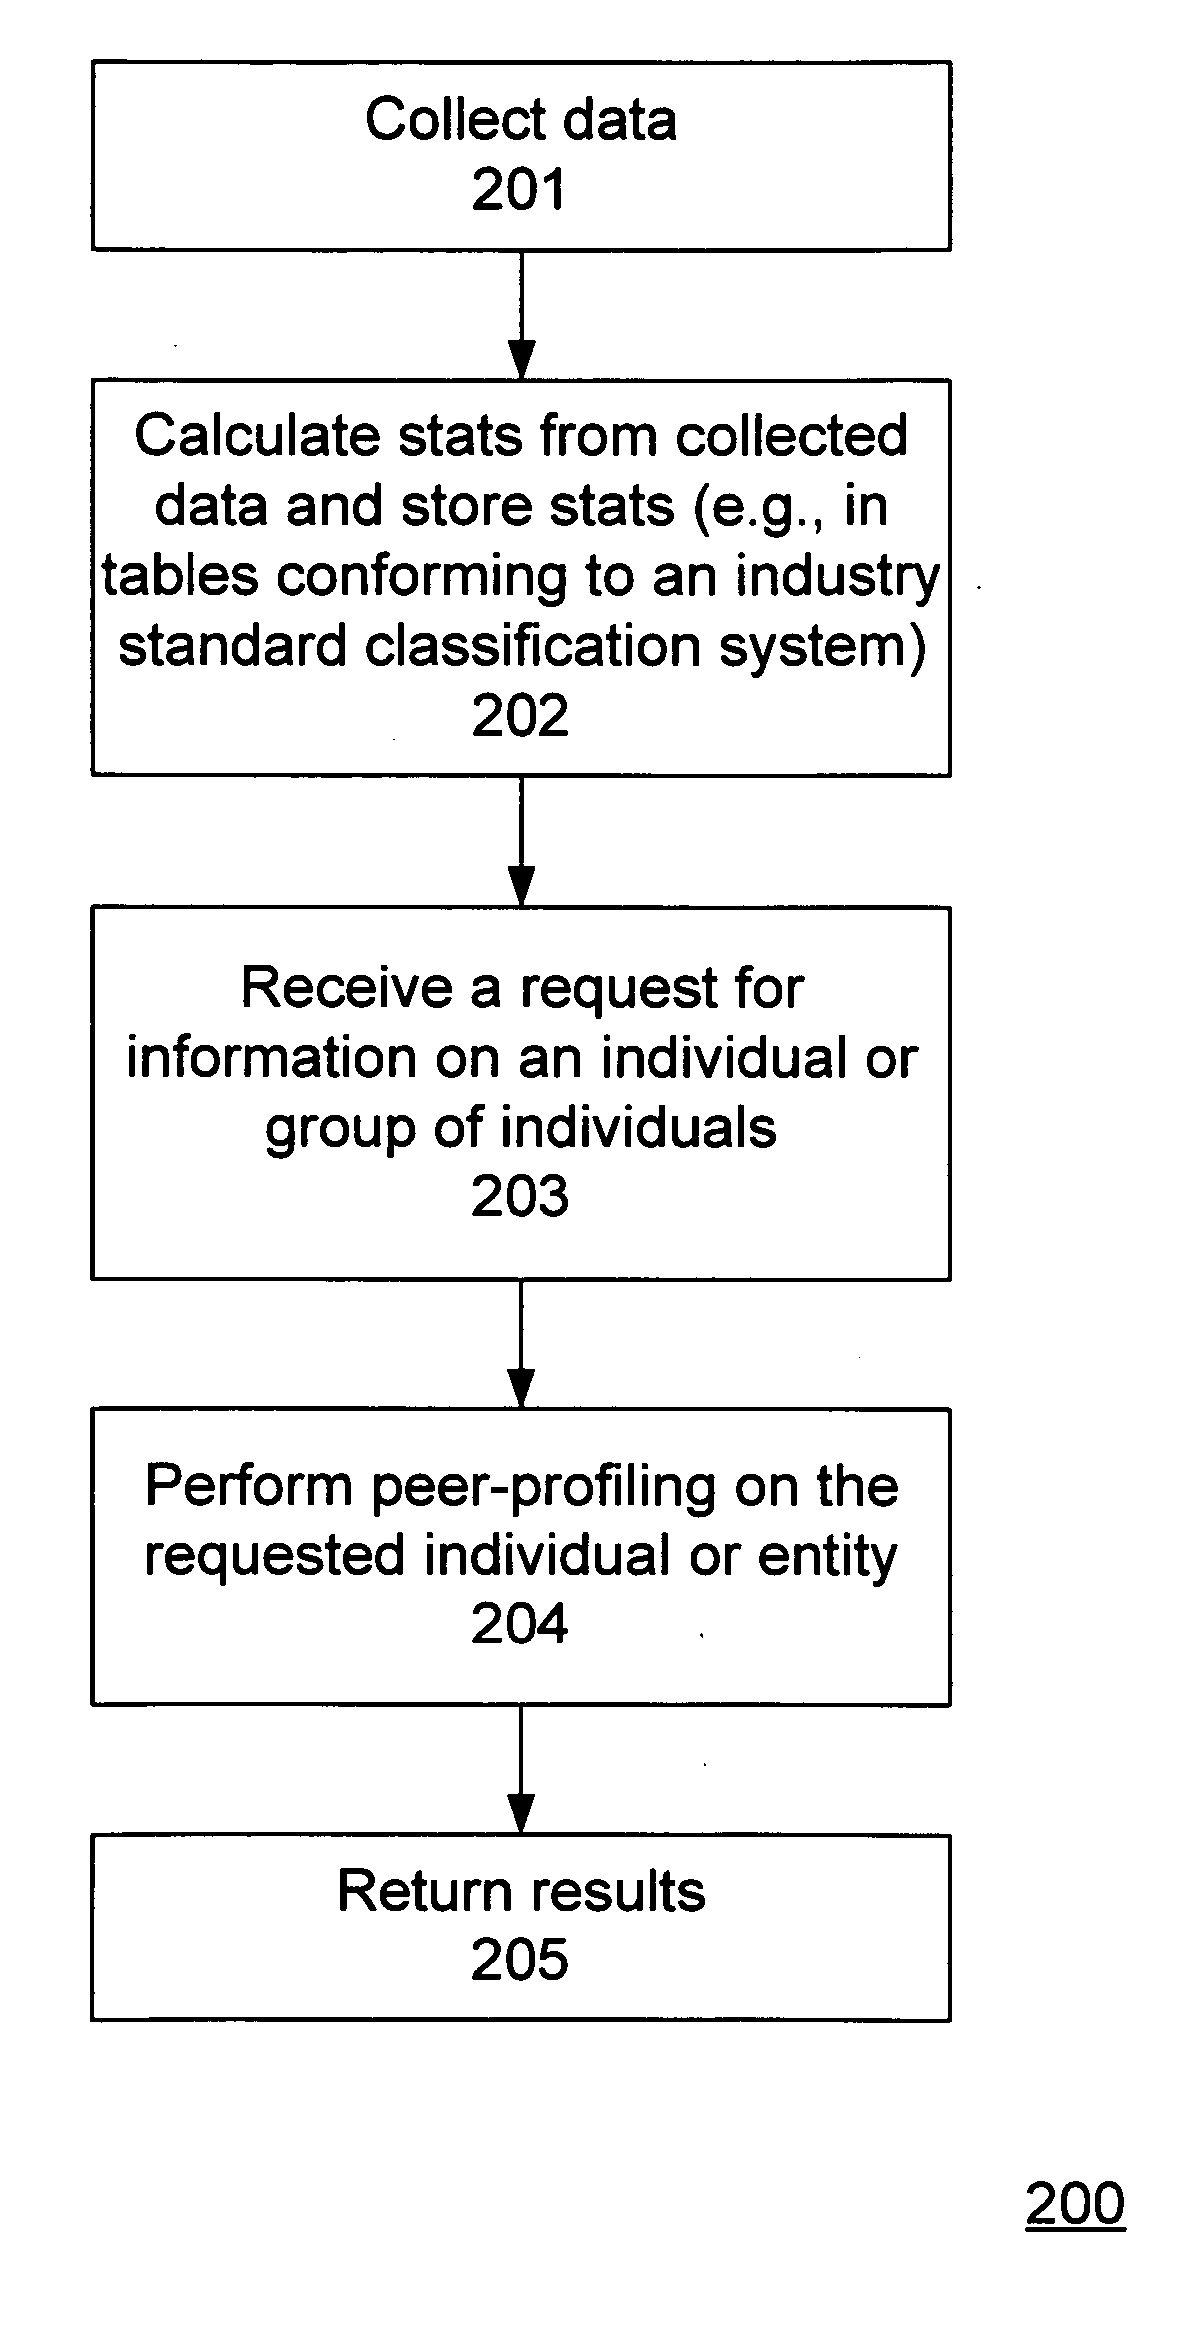 System and method for peer-profiling individual performance